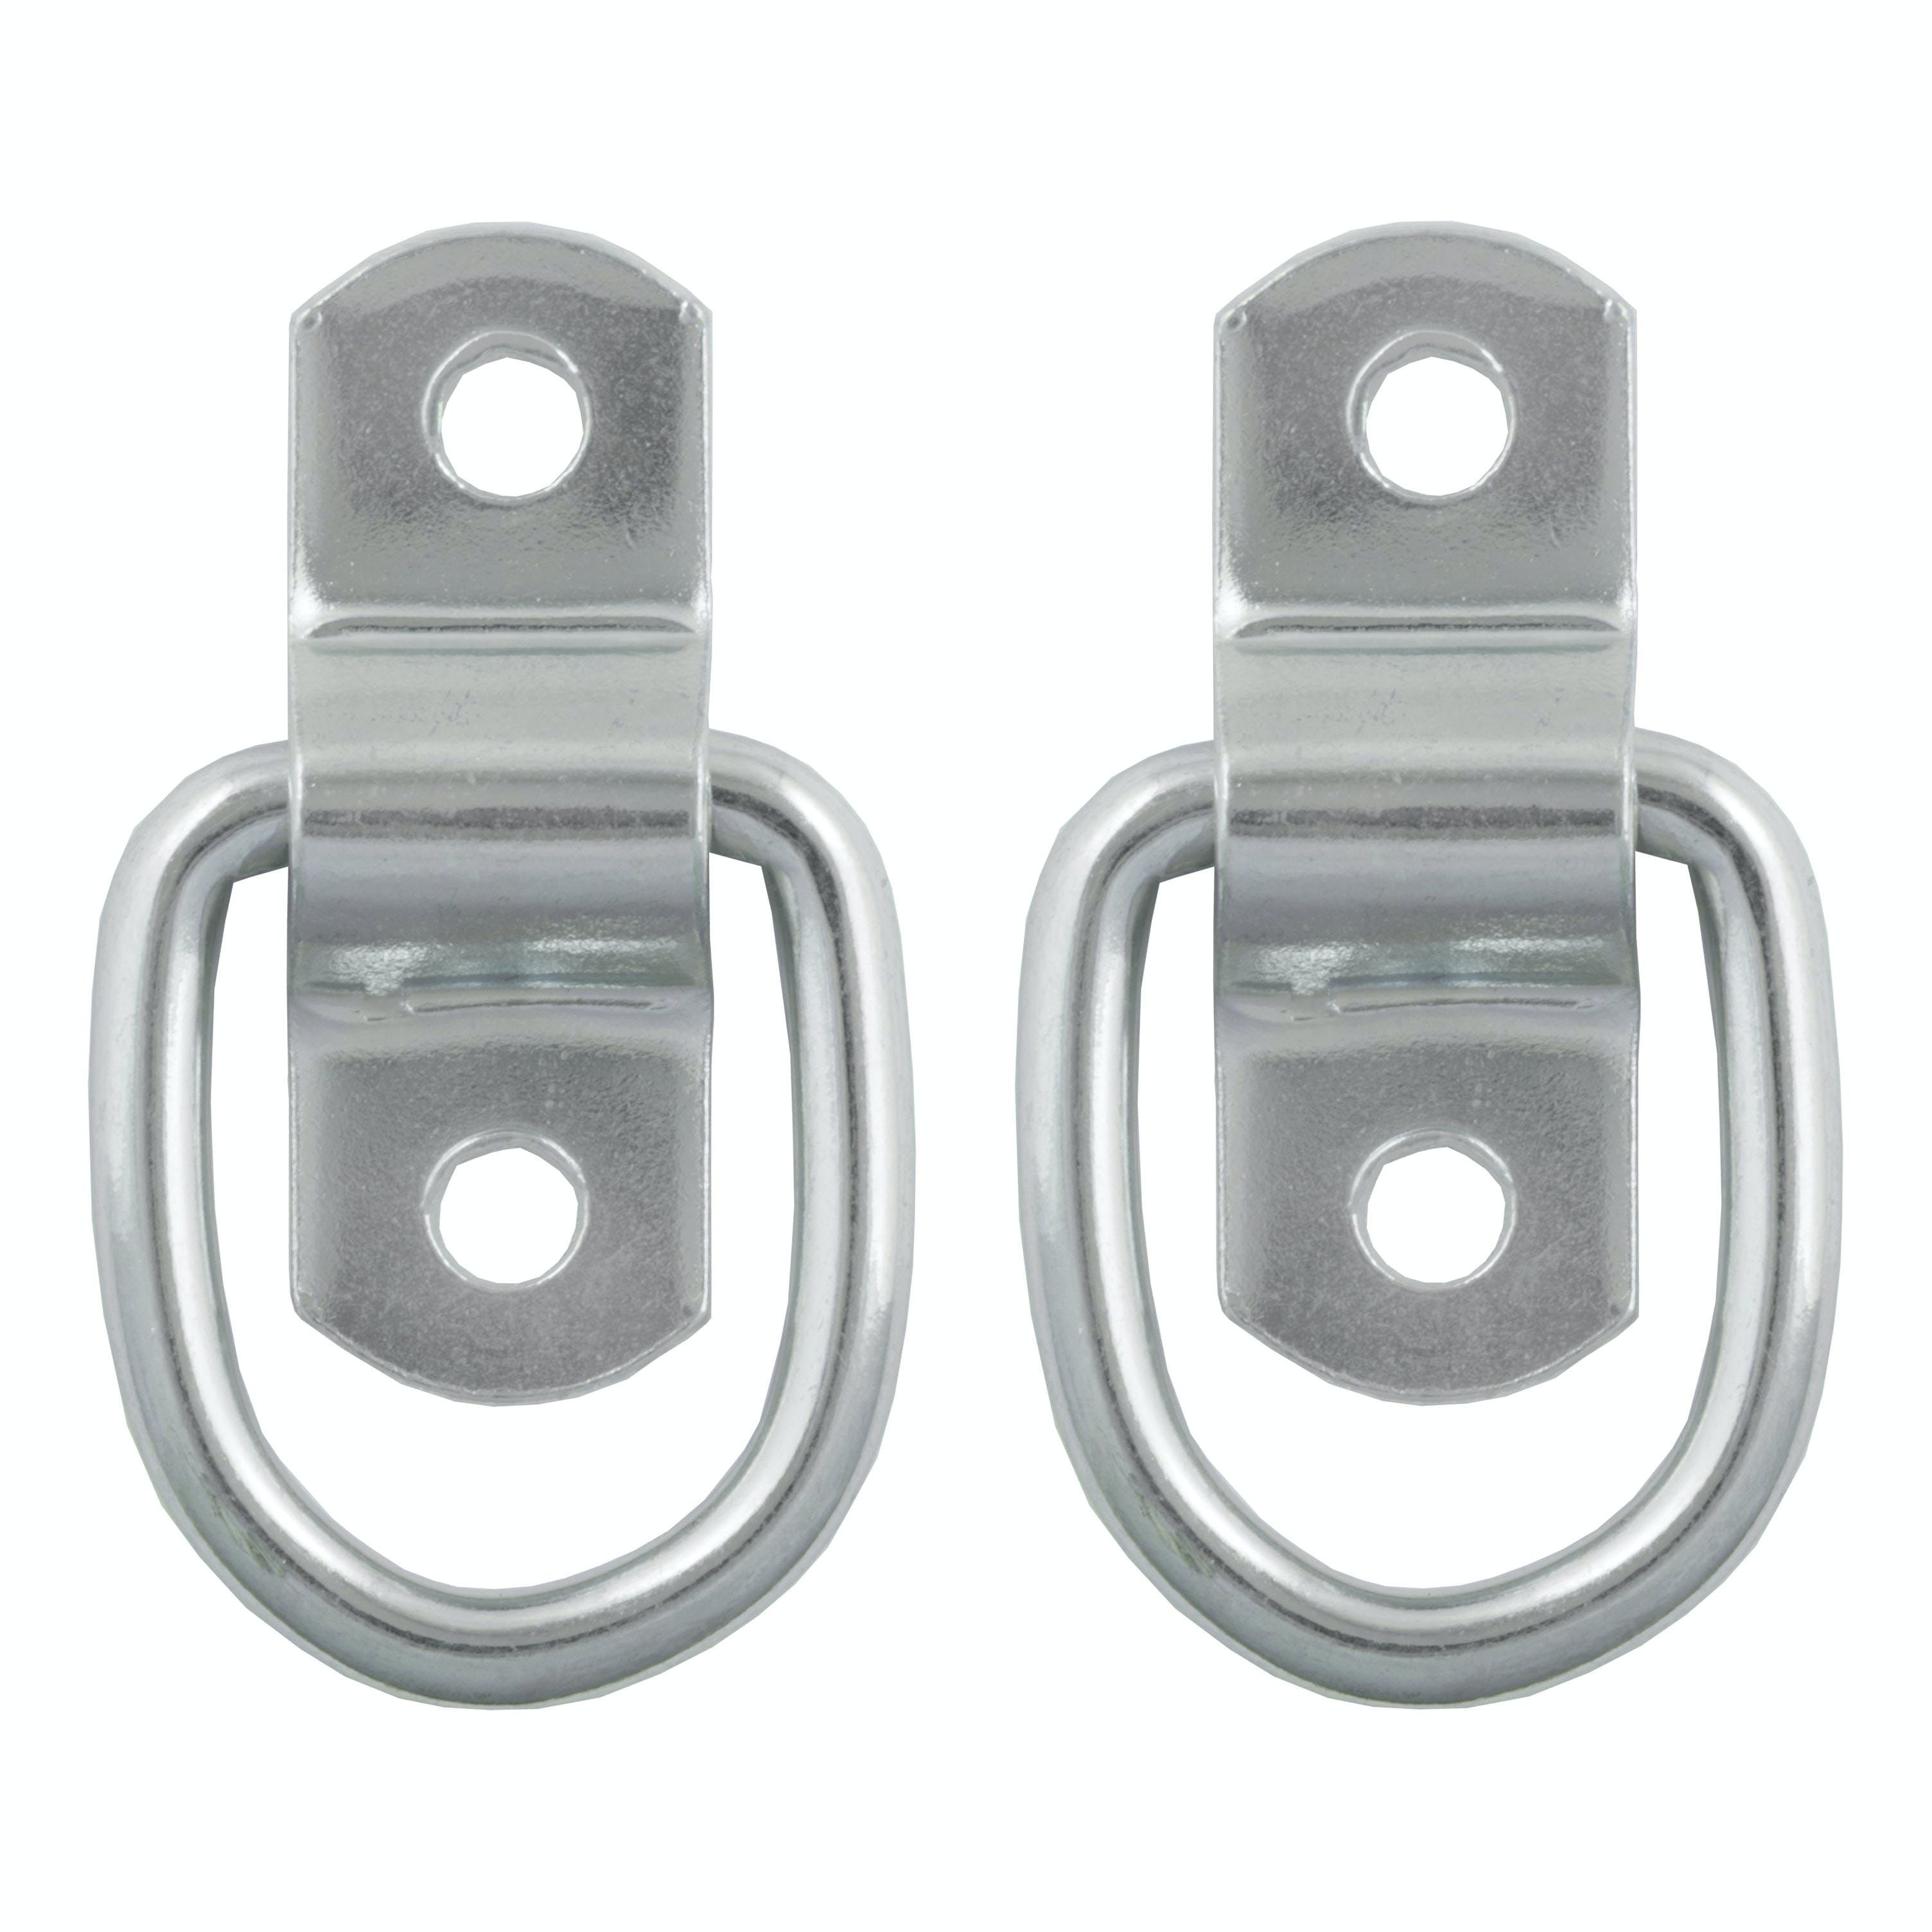 CURT 83731 1 x 1-1/4 Surface-Mounted Tie-Down D-Rings (1,200 lbs, Clear Zinc, 2-Pack)